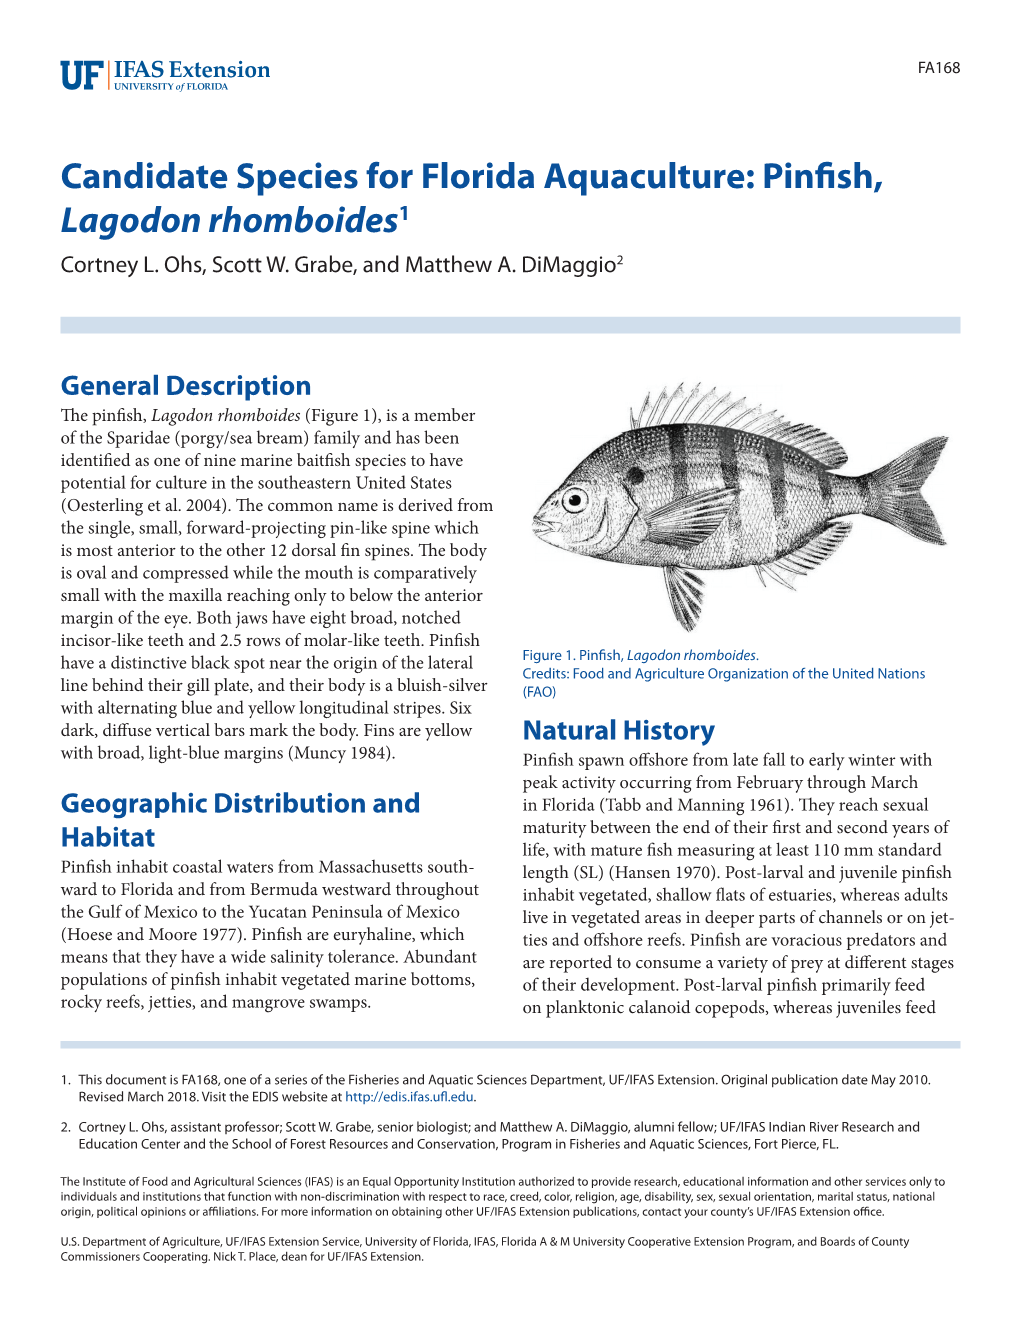 Candidate Species for Florida Aquaculture: Pinfish, Lagodon Rhomboides1 Cortney L